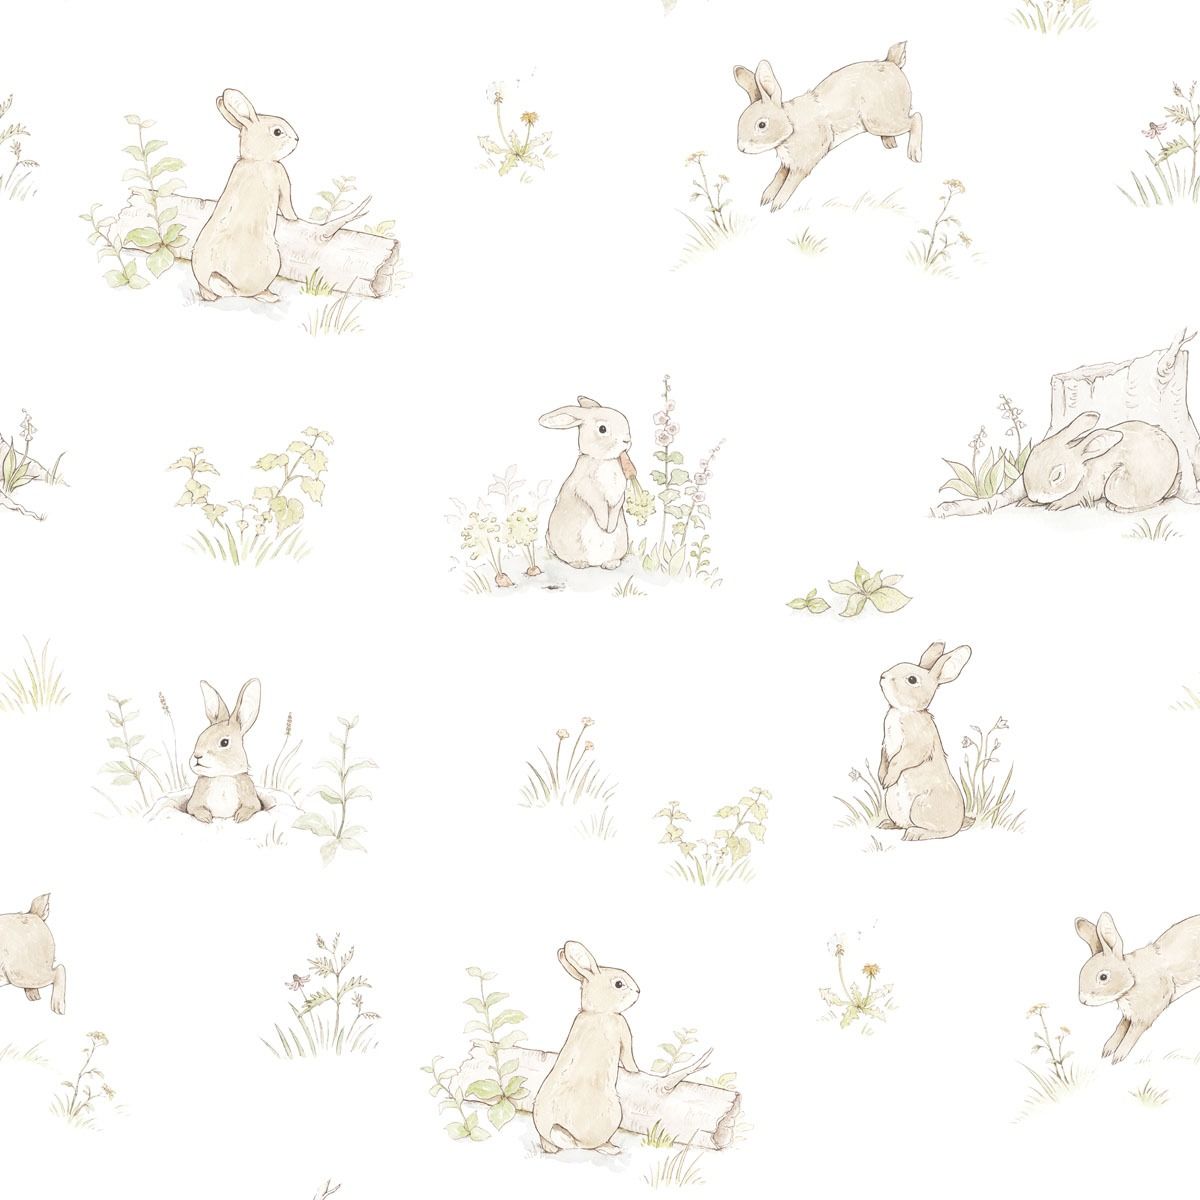 Rabbit Day Classic Wallpaper.com Wallstickers And Wallpaper Online Store